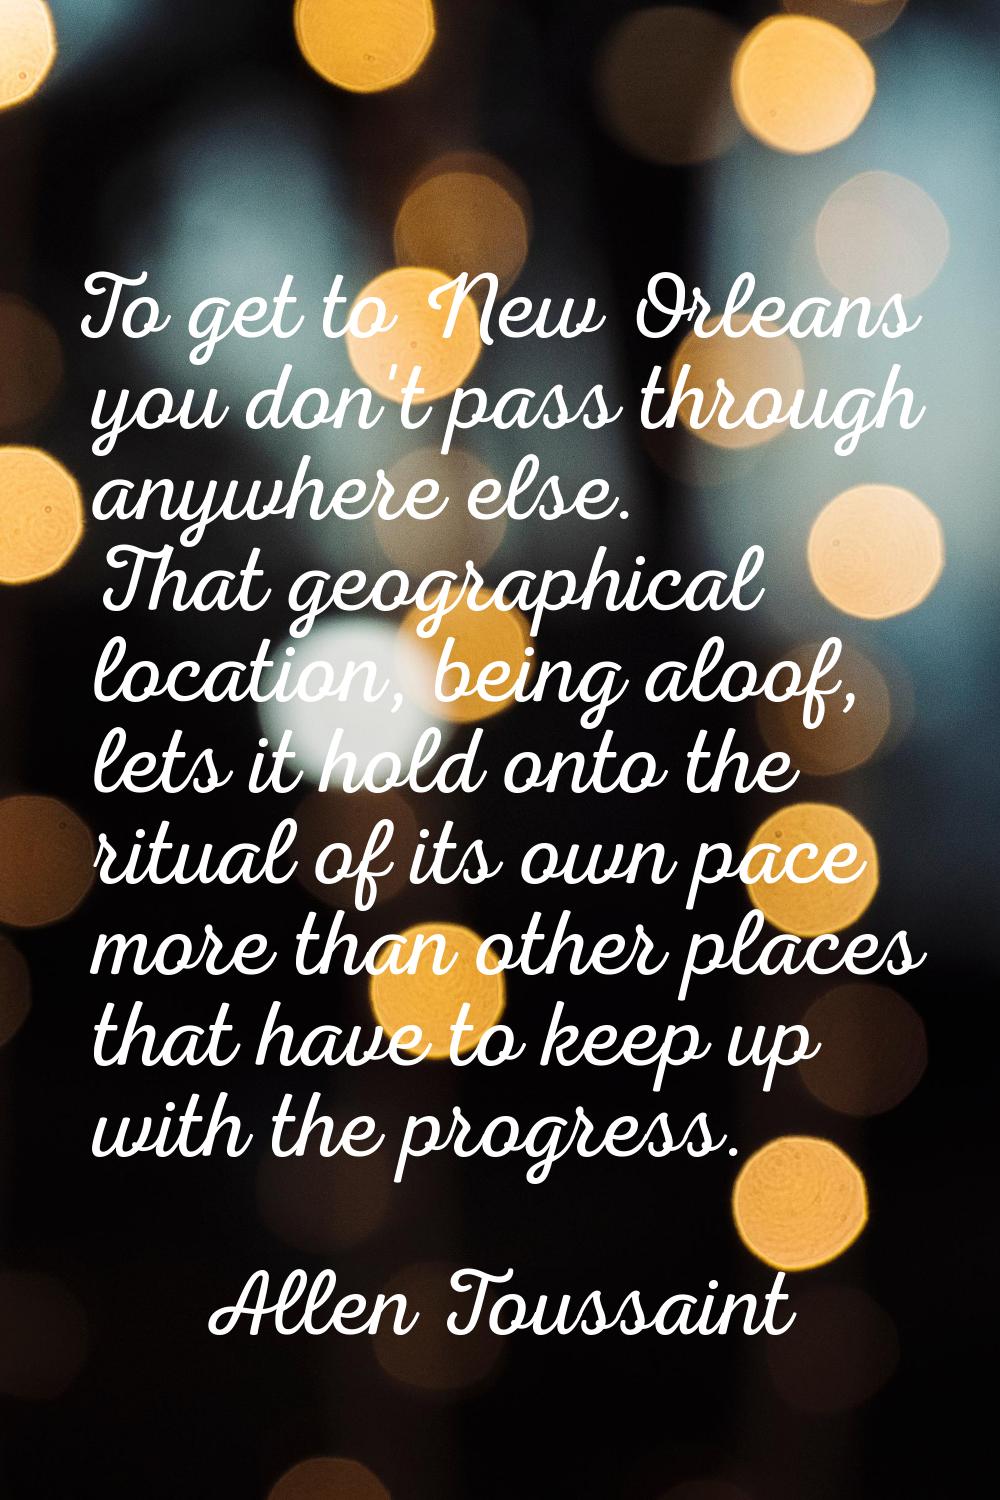 To get to New Orleans you don't pass through anywhere else. That geographical location, being aloof